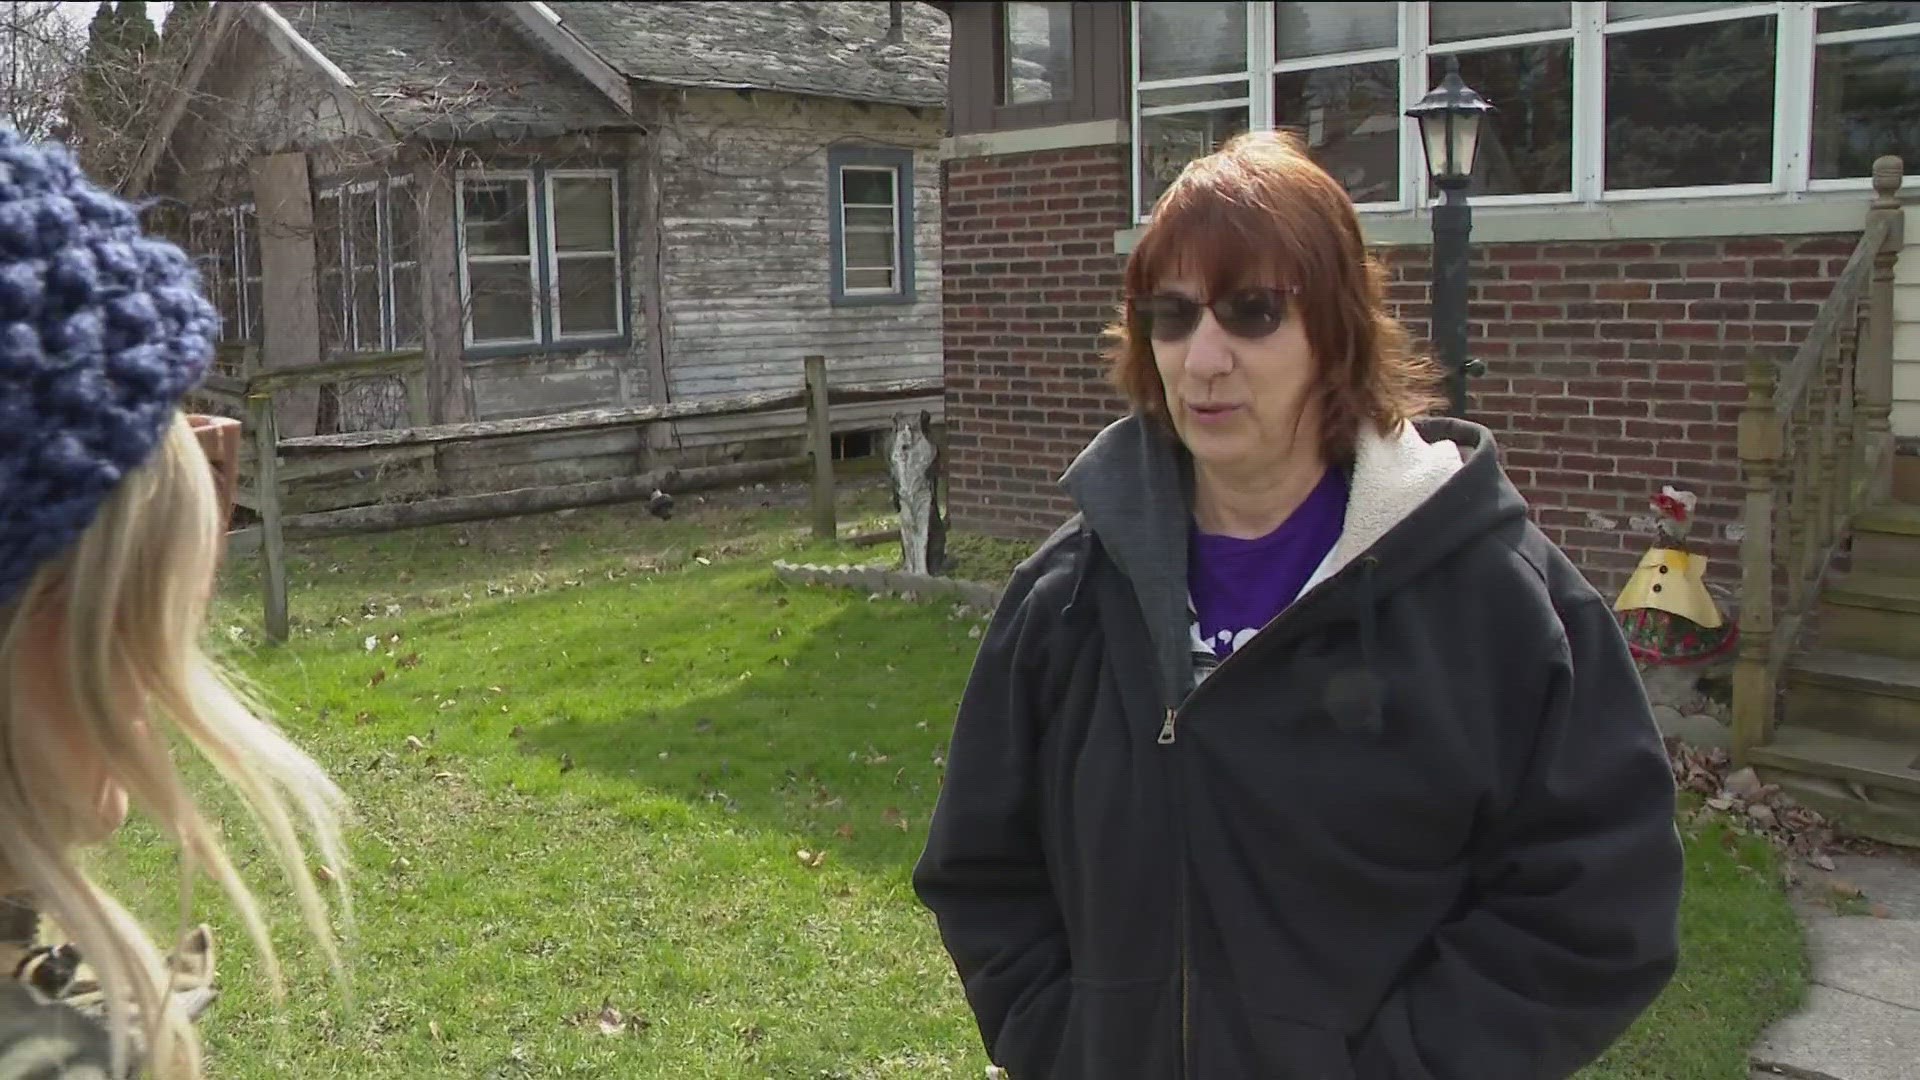 Denise Karczak said she has been complaining to the city for years about the house, owned by her dead neighbor, that's bringing vermin, trash and stench to her home.